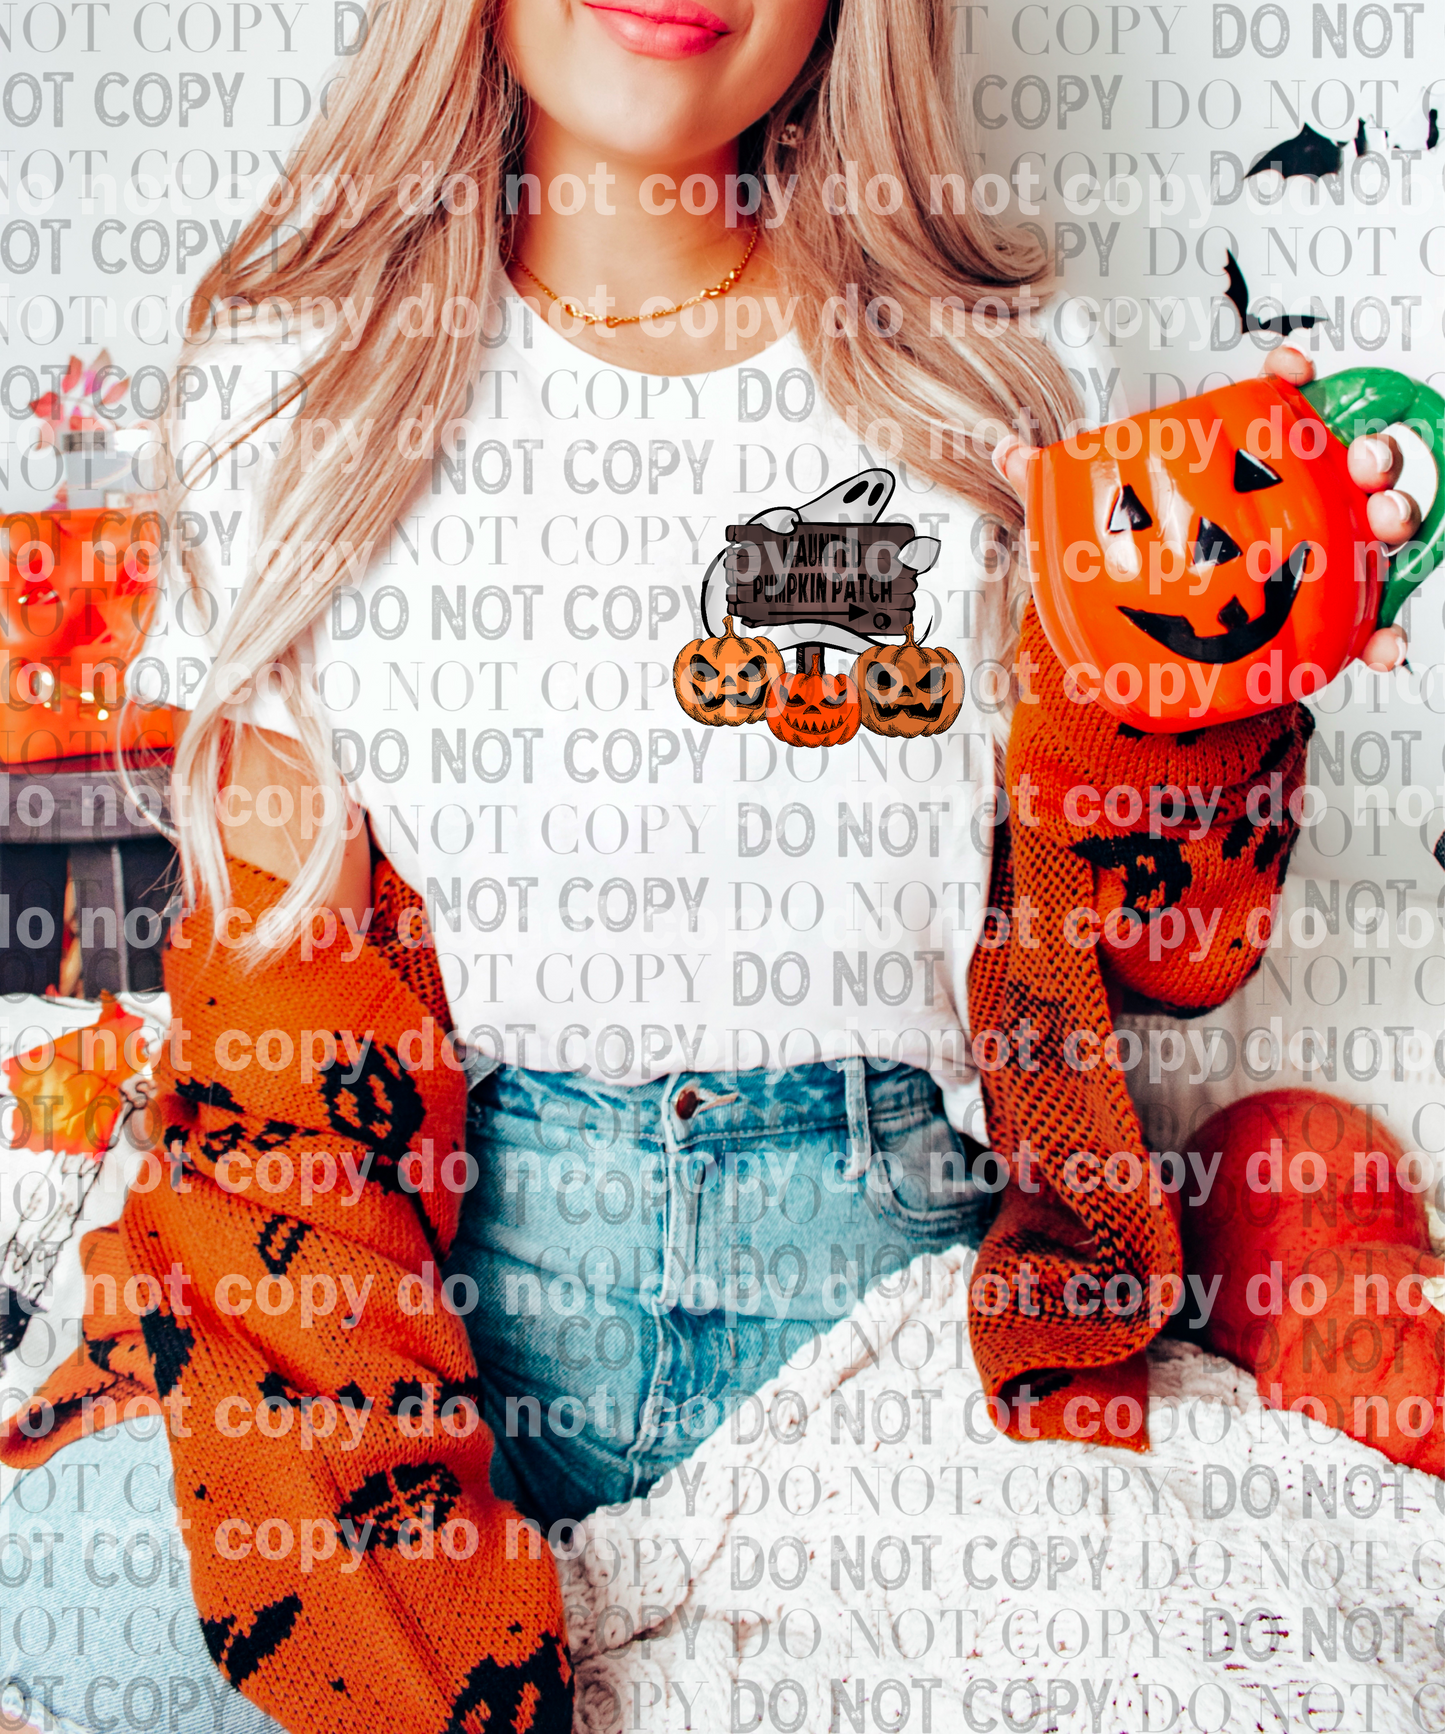 Haunted Pumpkin Patch Dream Print or Sublimation Print